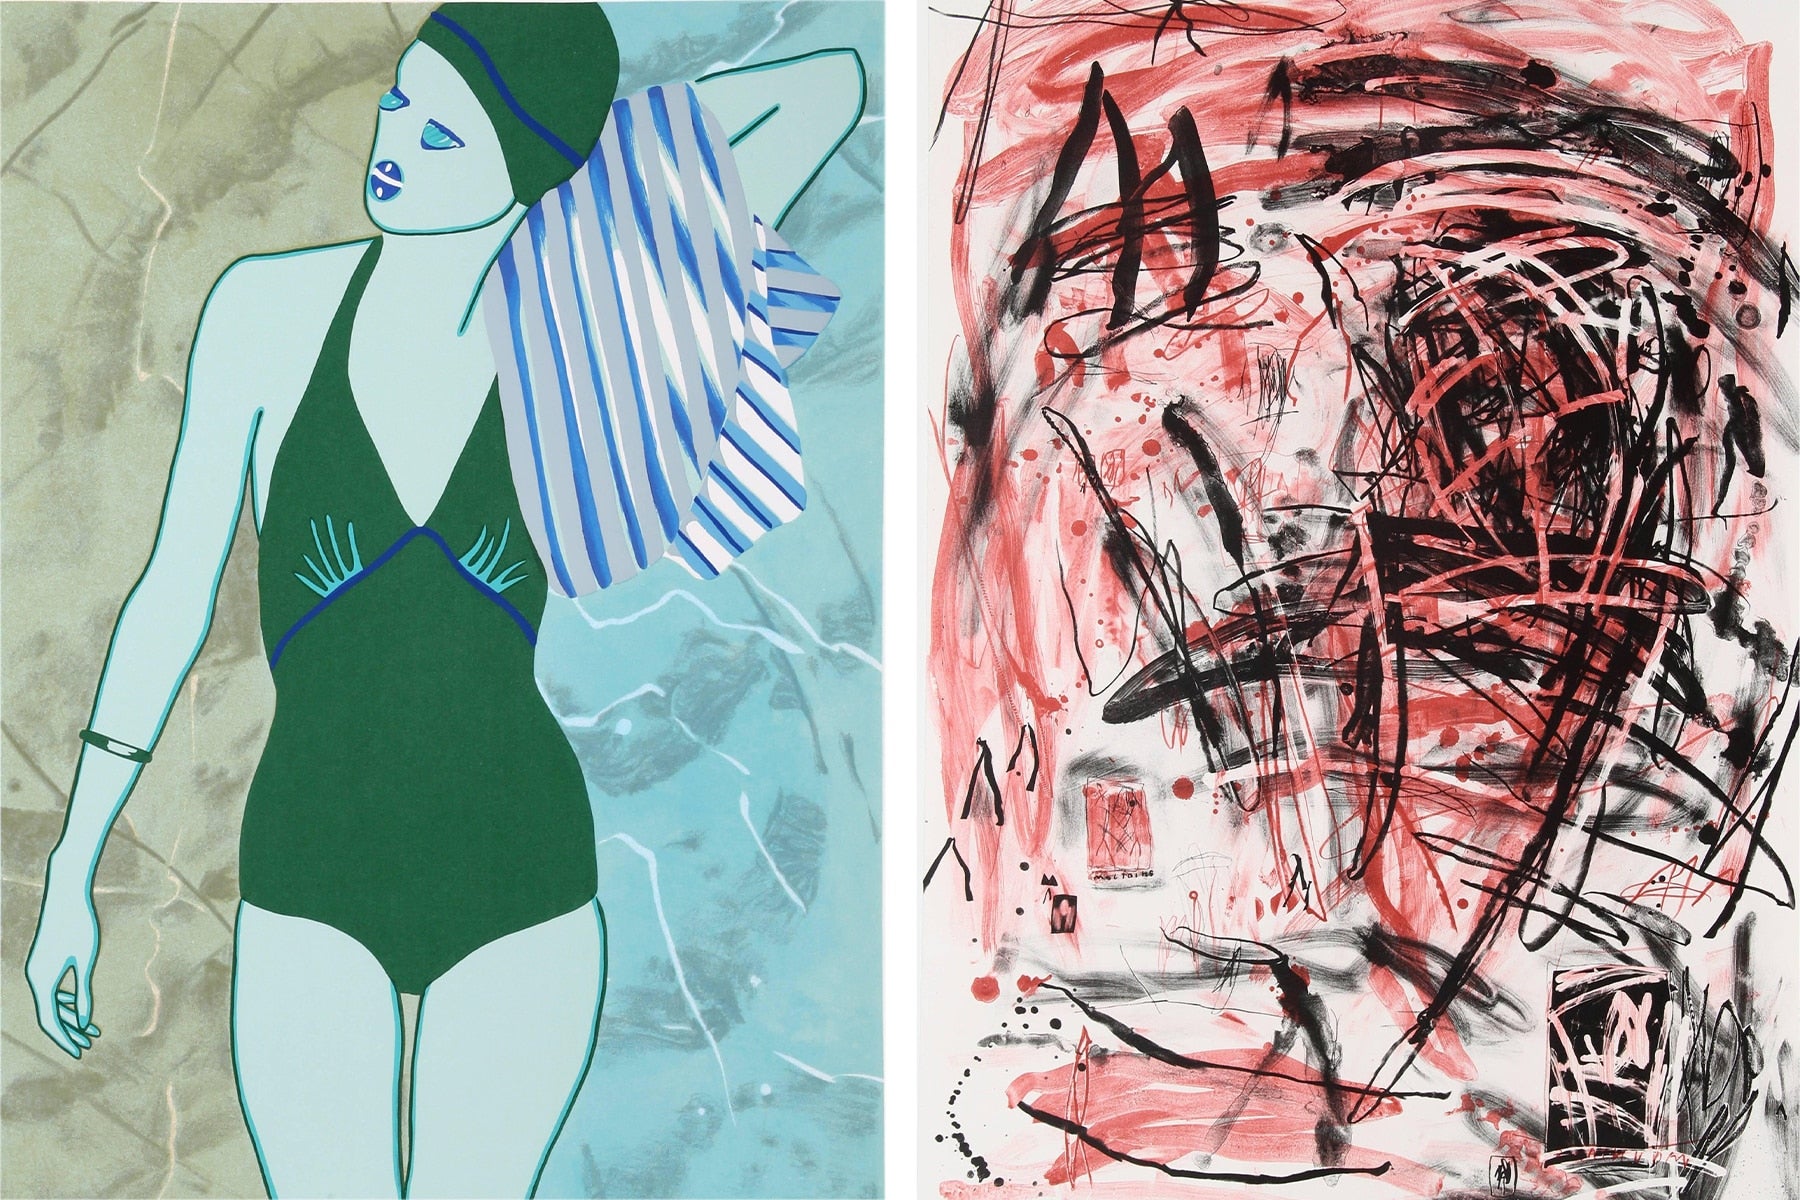 7 Exciting Works by Female Artists from the RoGallery Auction